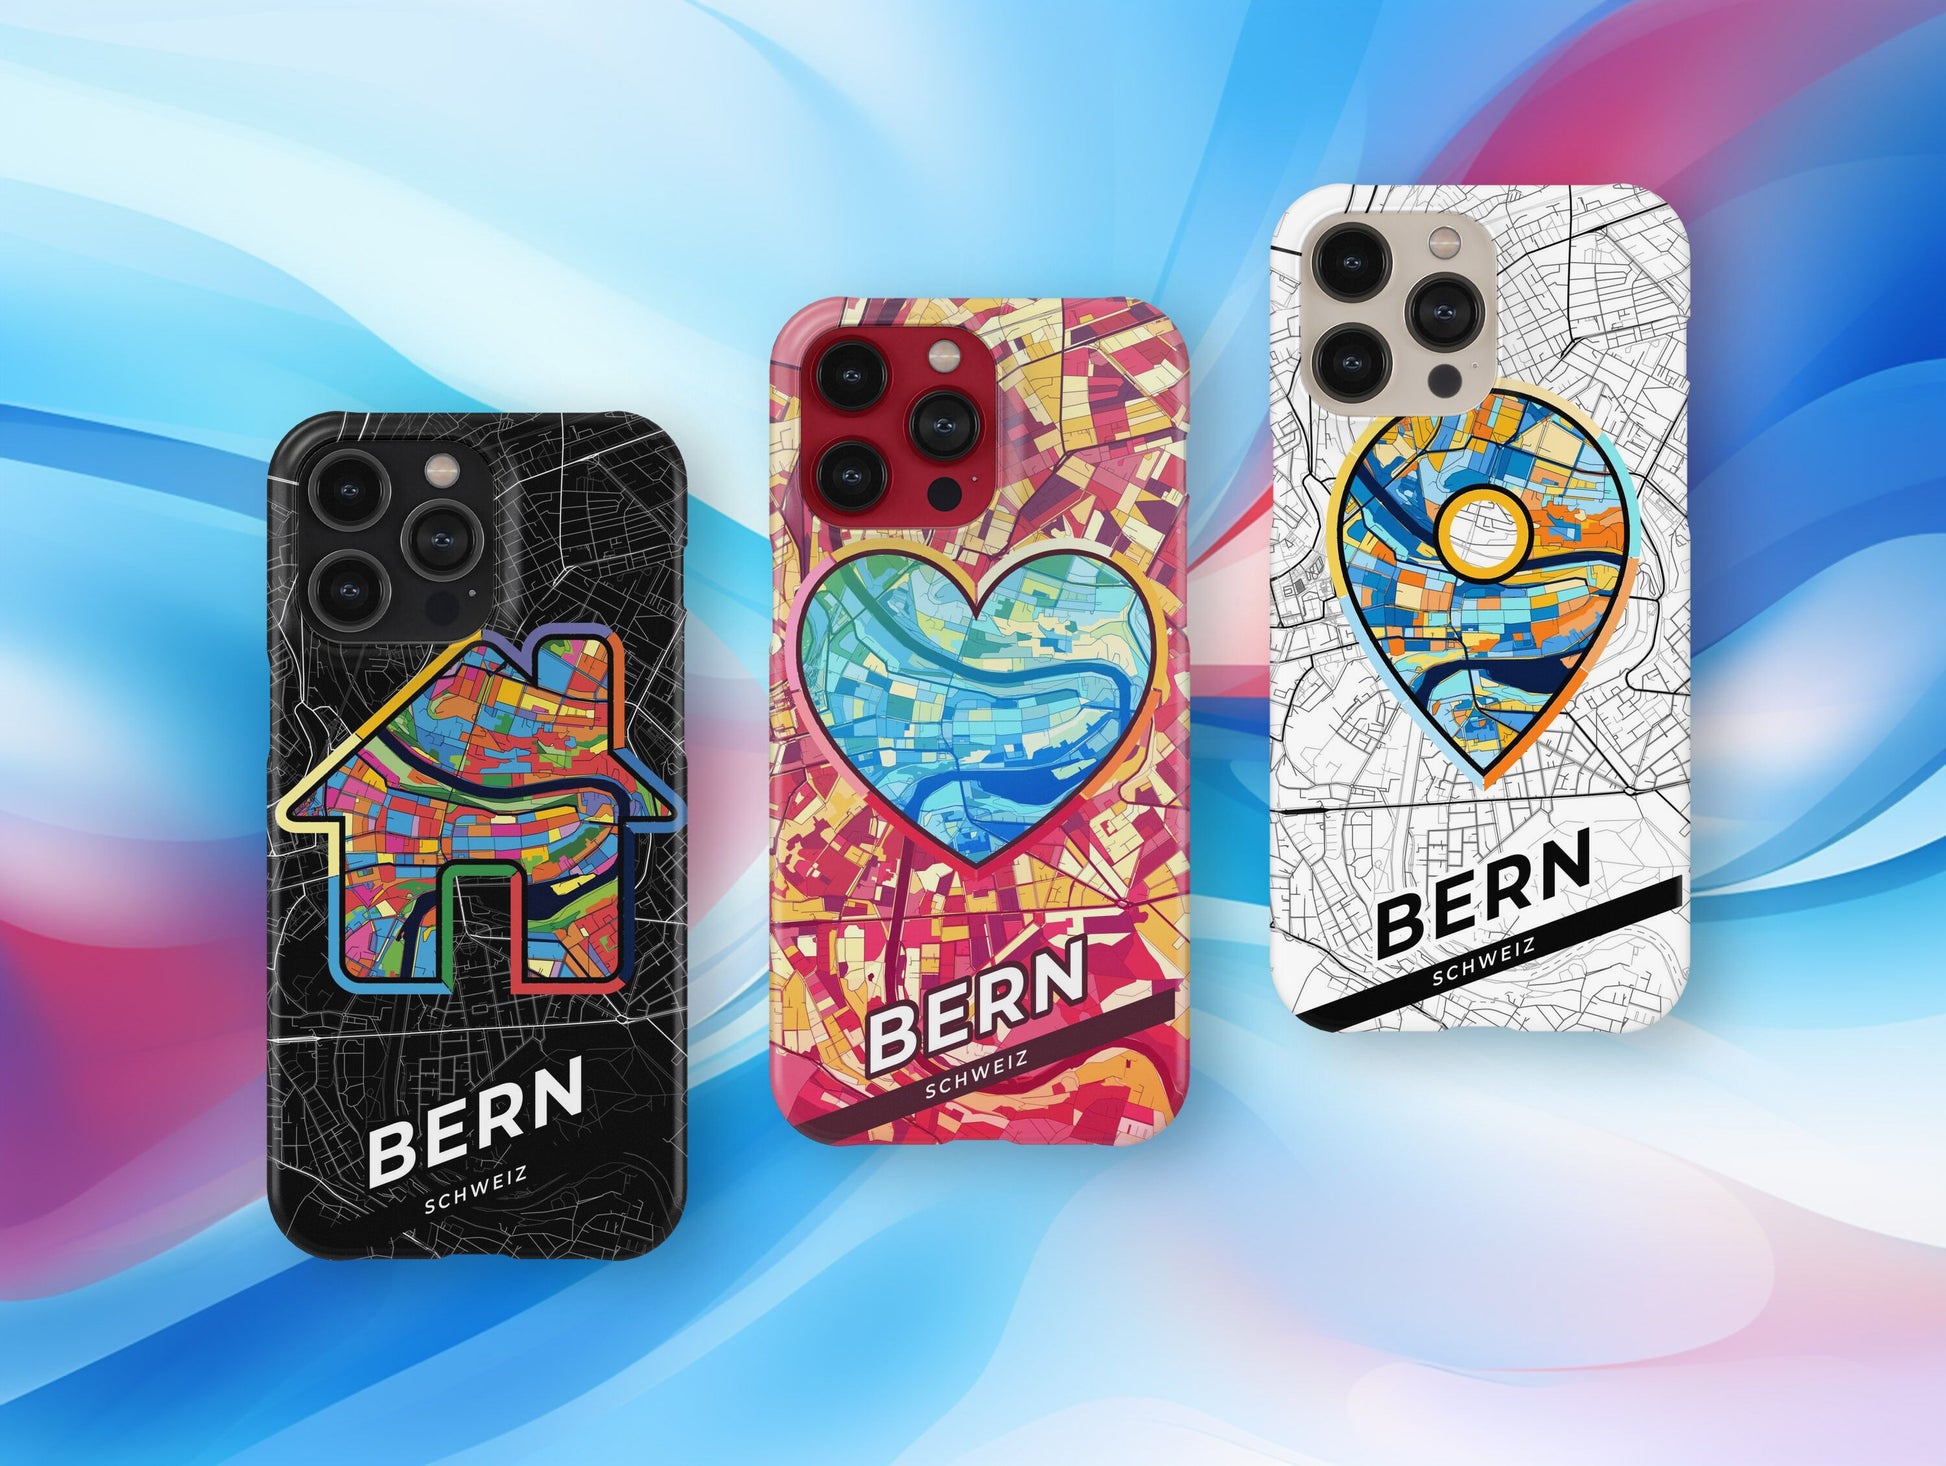 Bern Switzerland slim phone case with colorful icon. Birthday, wedding or housewarming gift. Couple match cases.